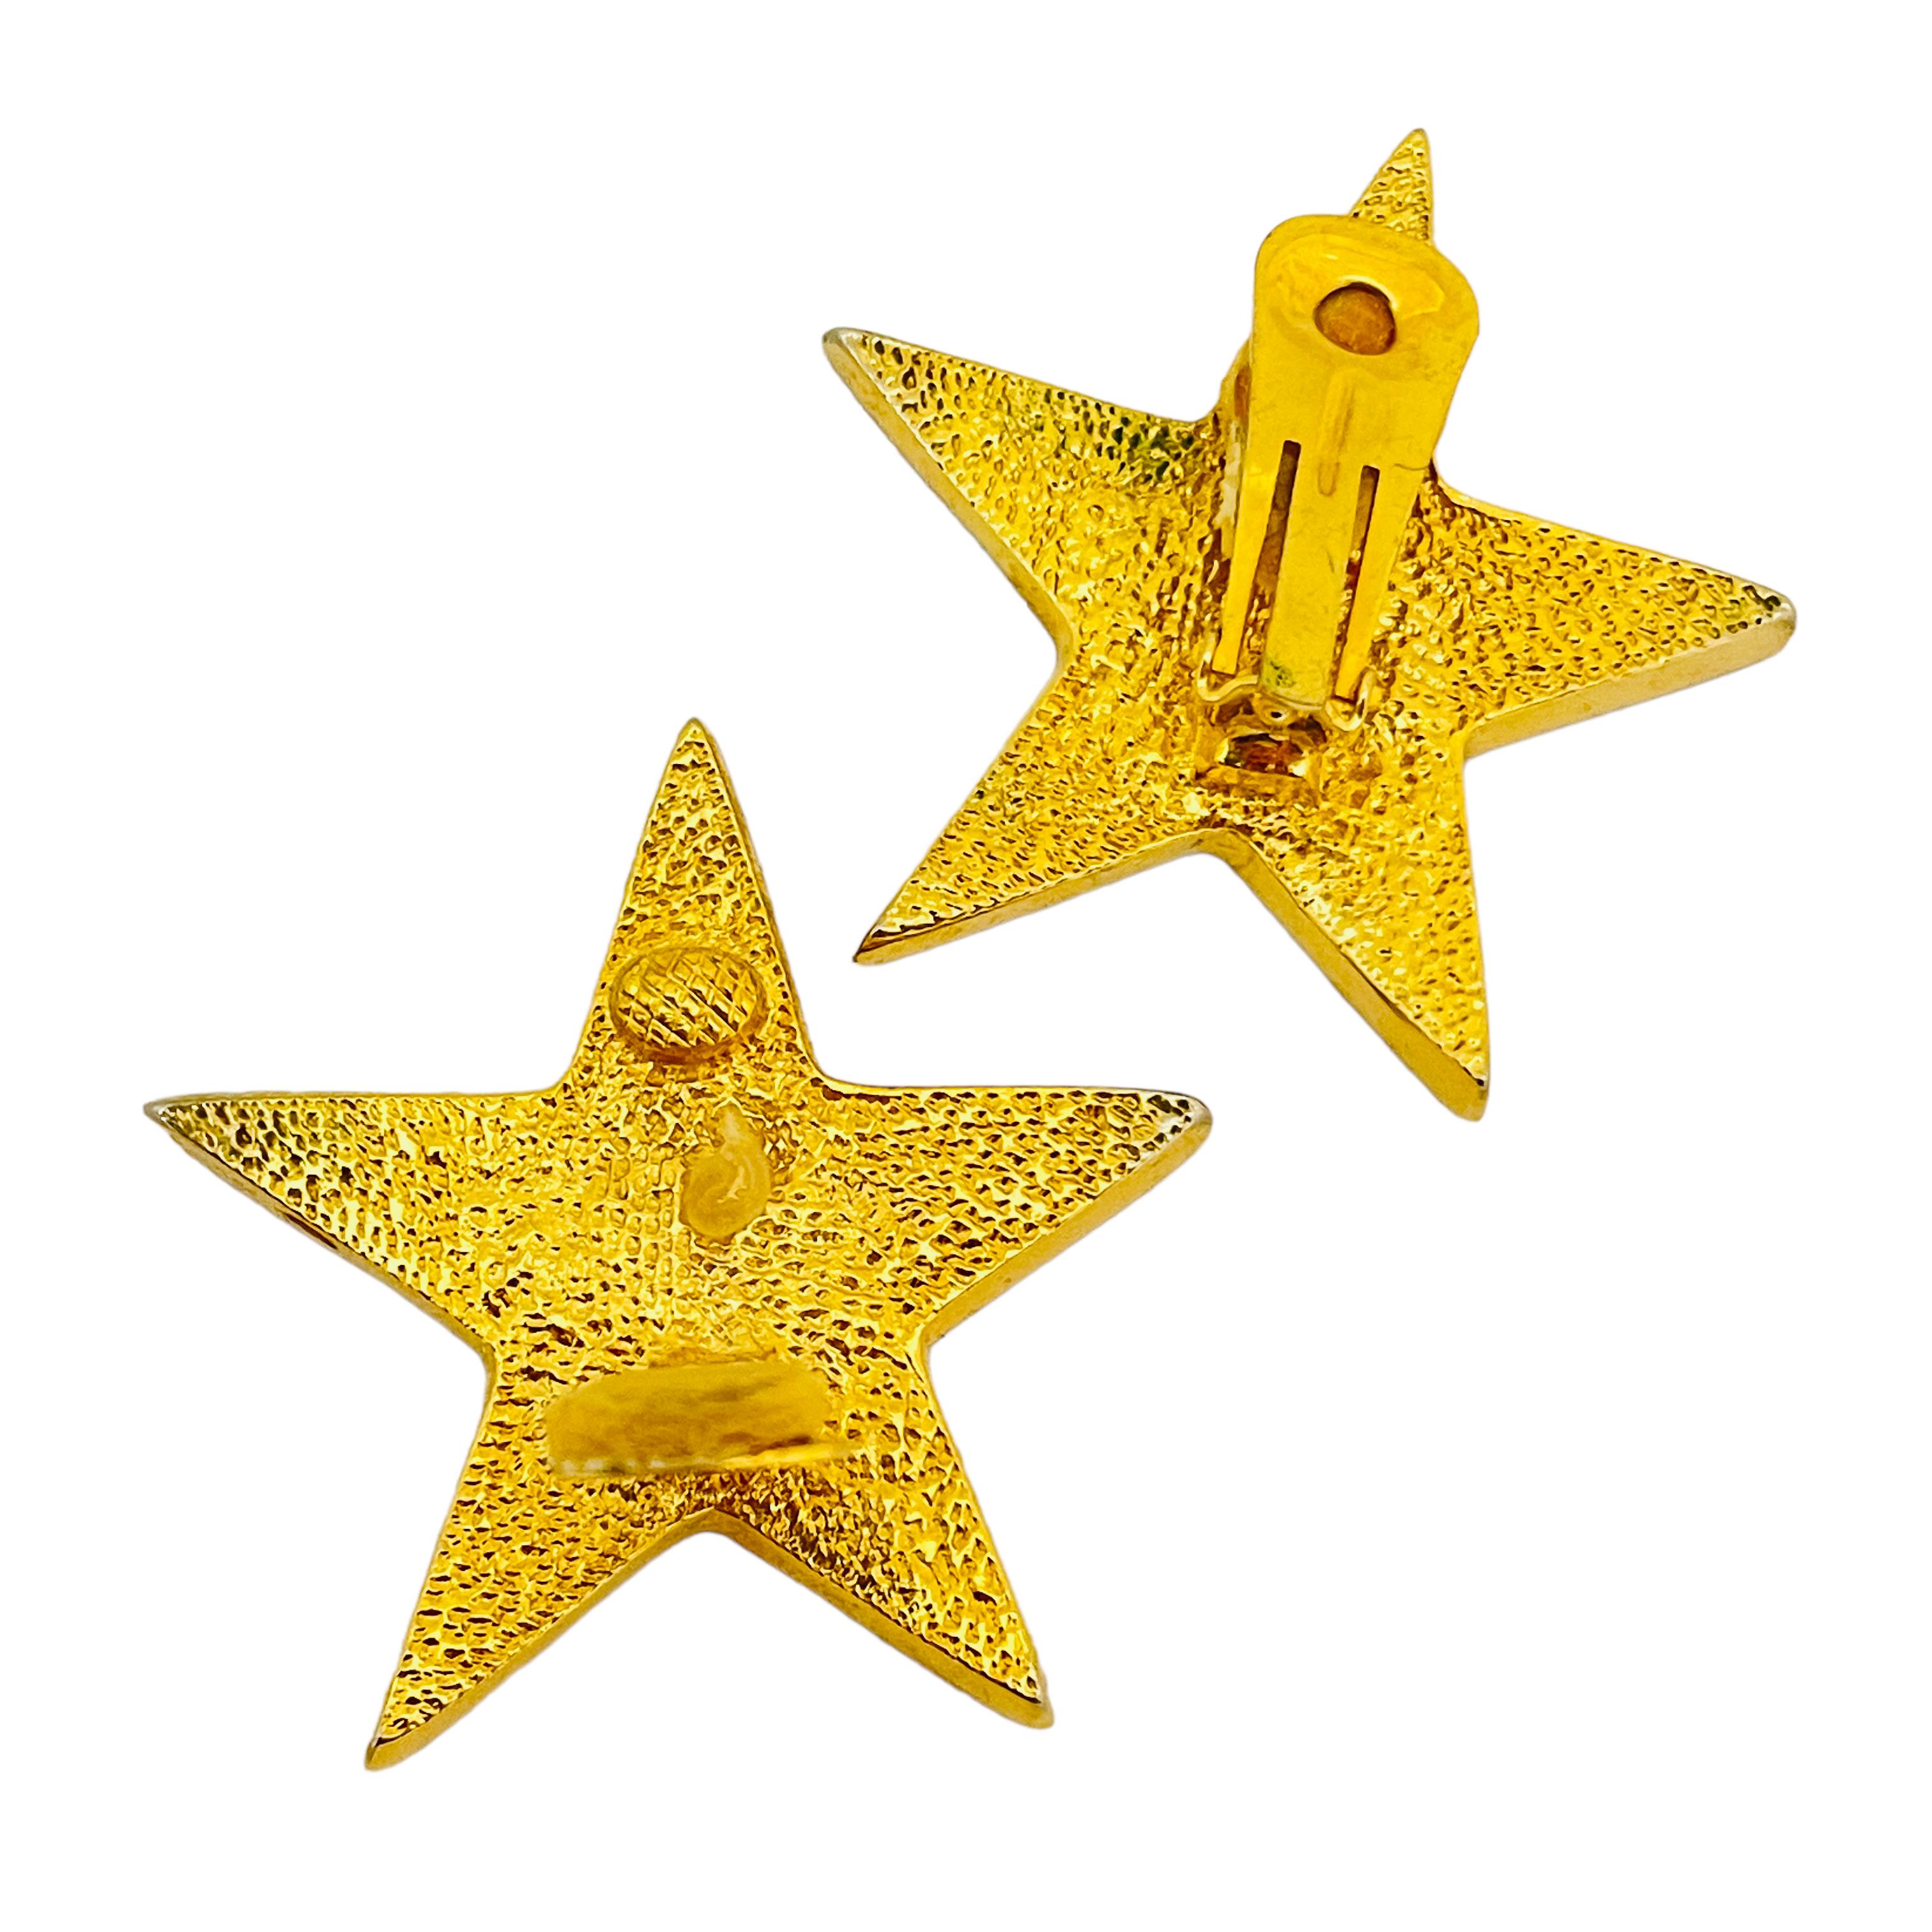 Vintage gold rhinestone star designer runway clip on earrings In Good Condition For Sale In Palos Hills, IL